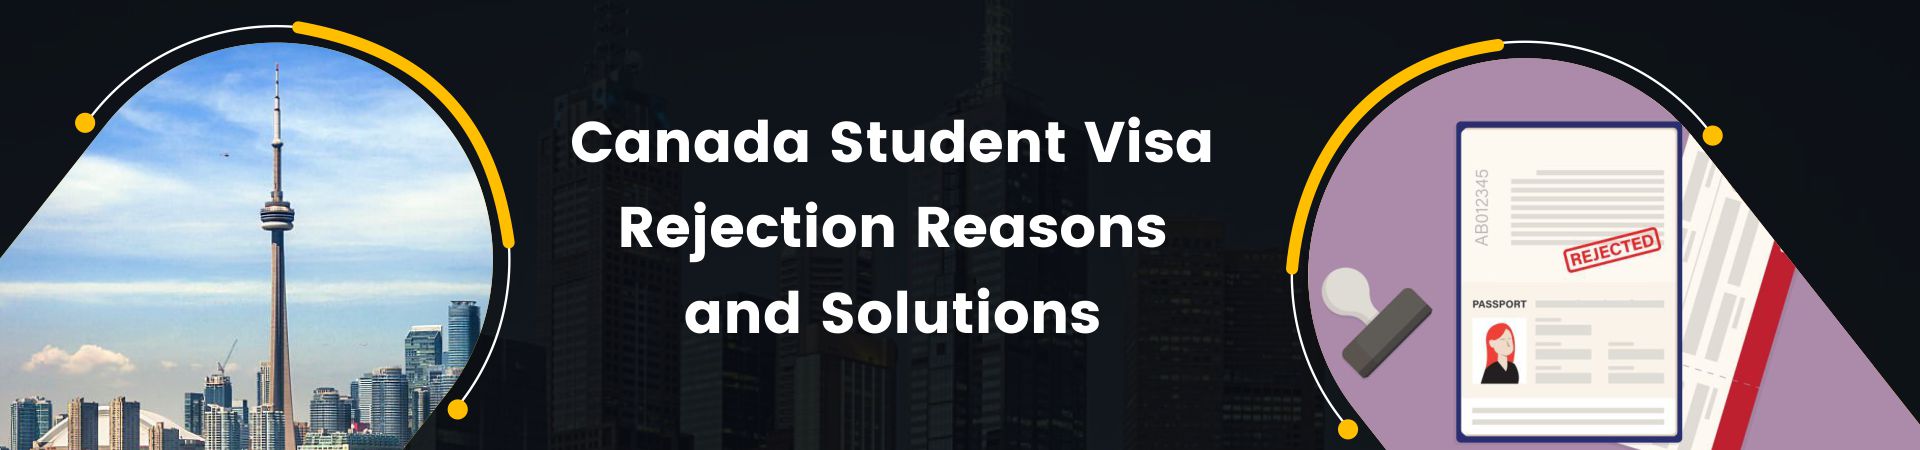 Canada Student Visa Rejection: Reasons and Solutions